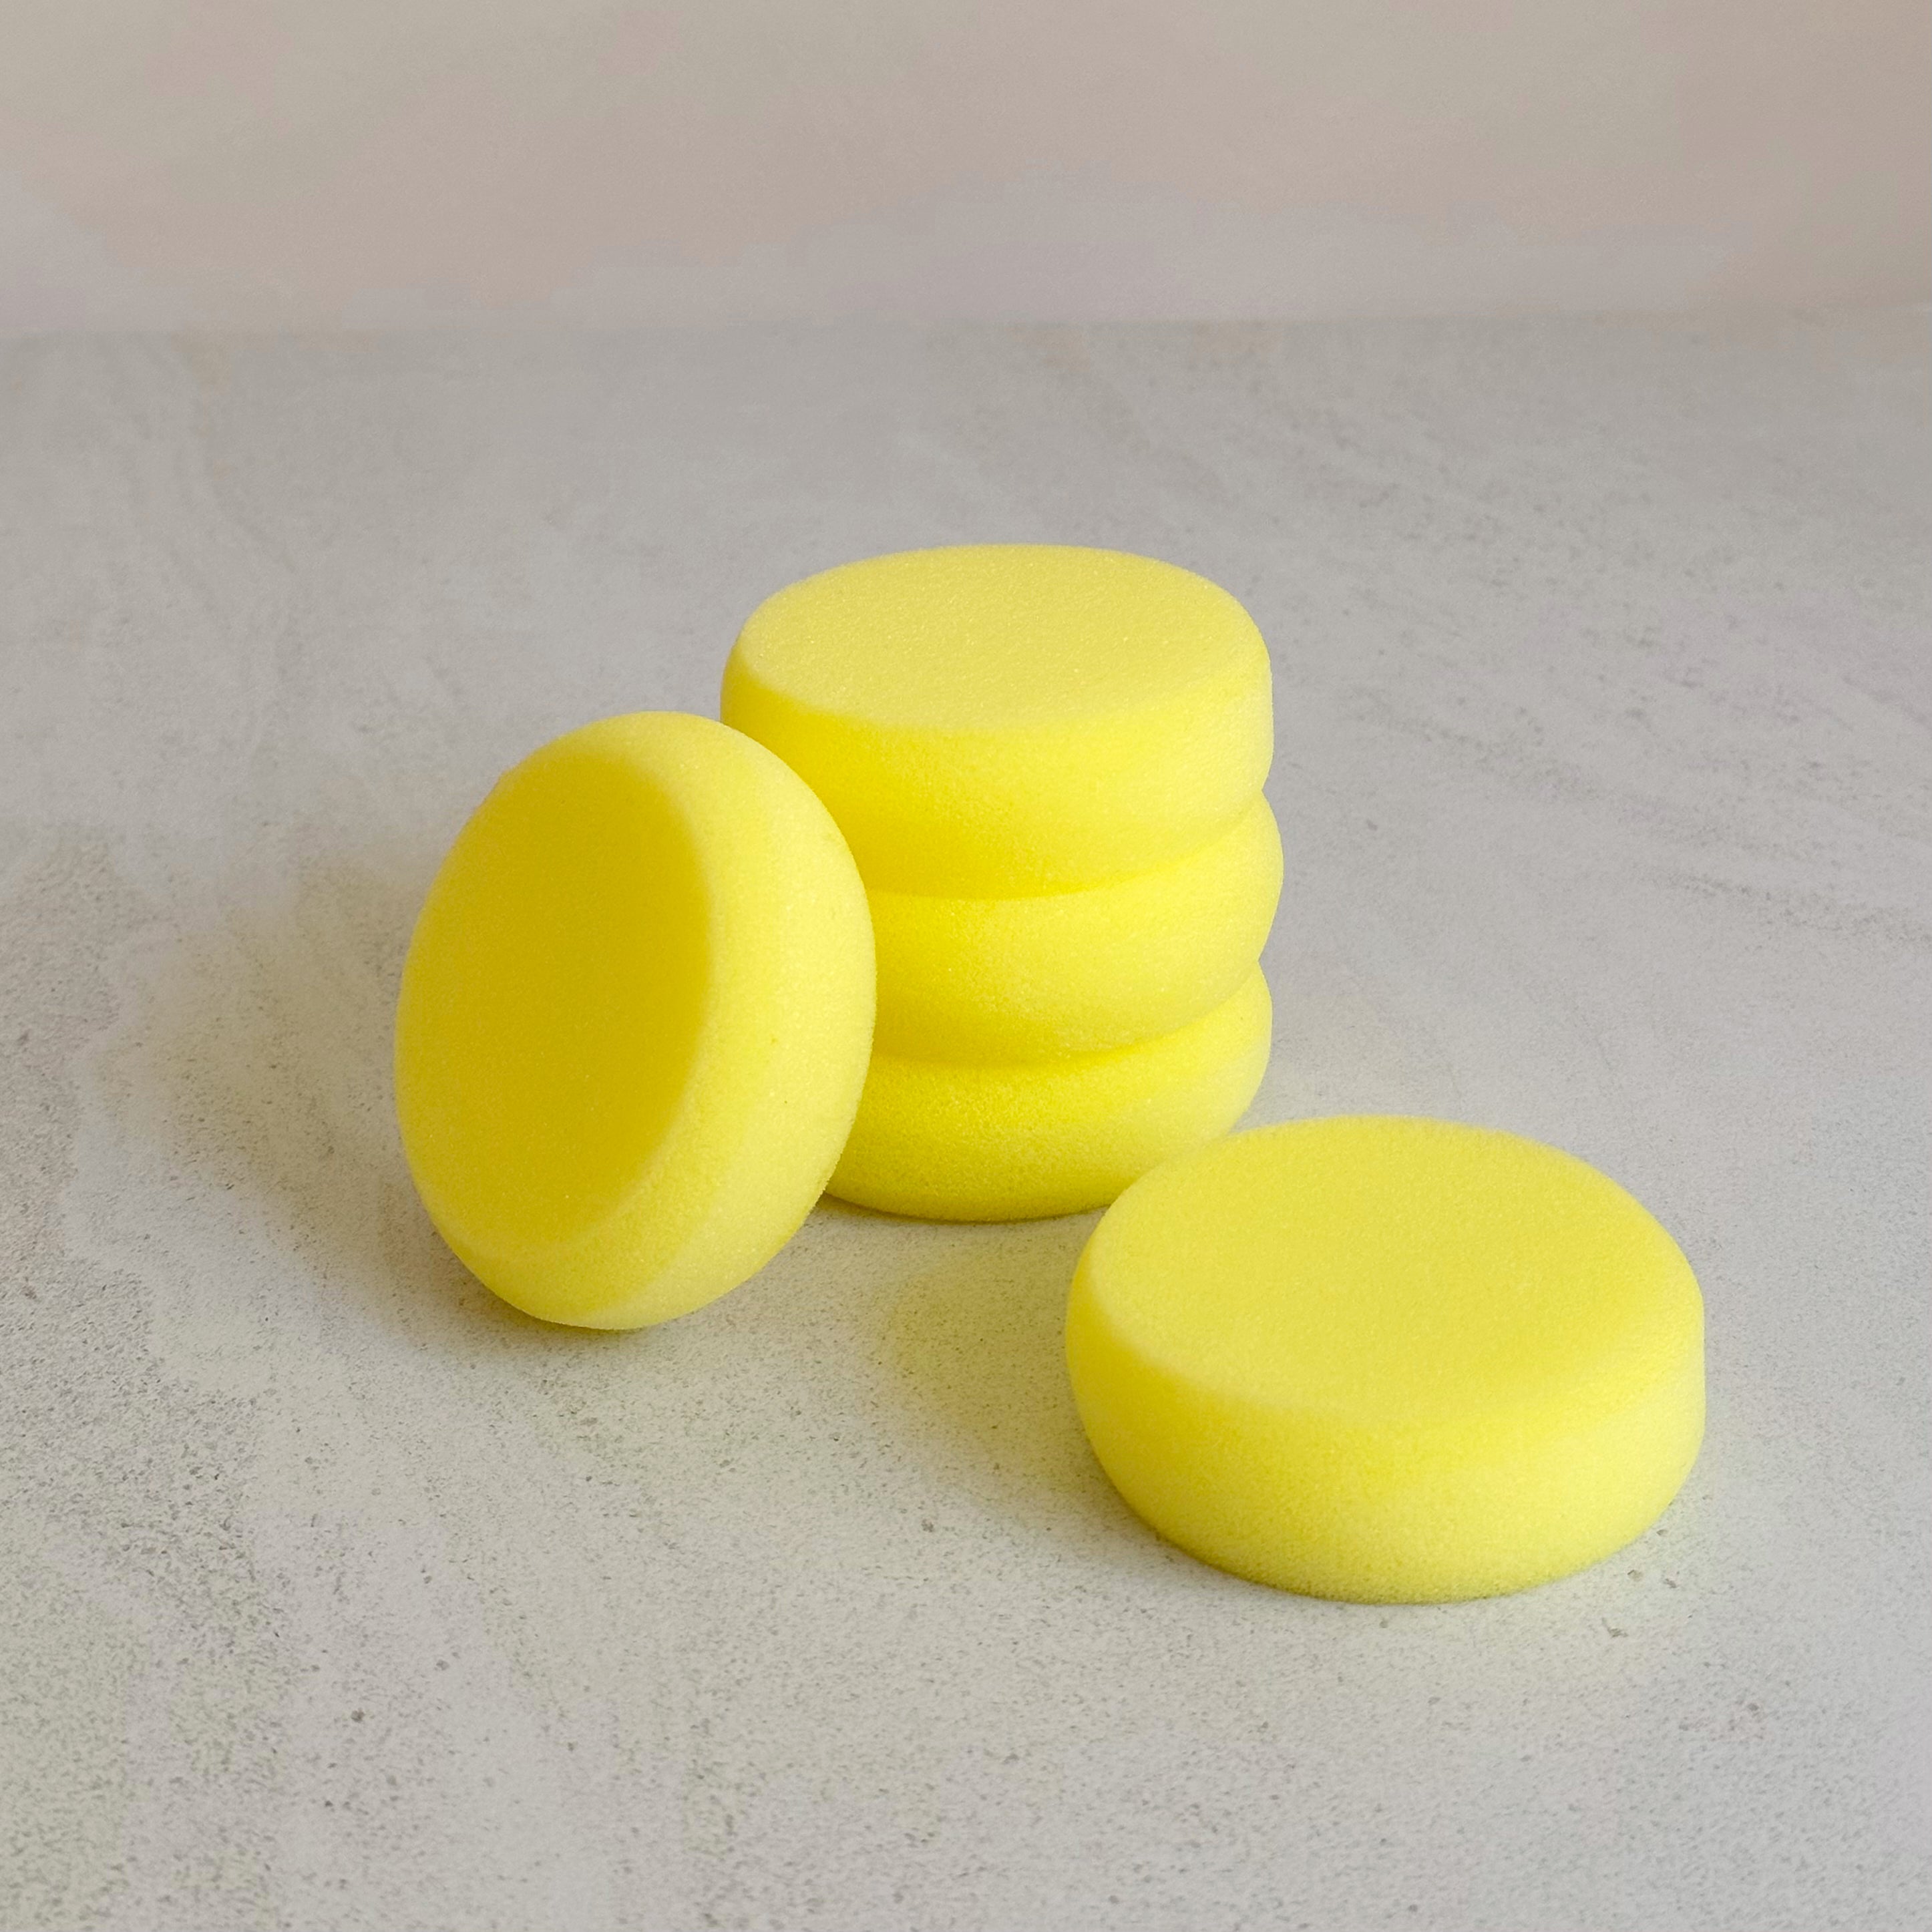 Round Synthetic Pottery Sponge – Fin Pottery Tools